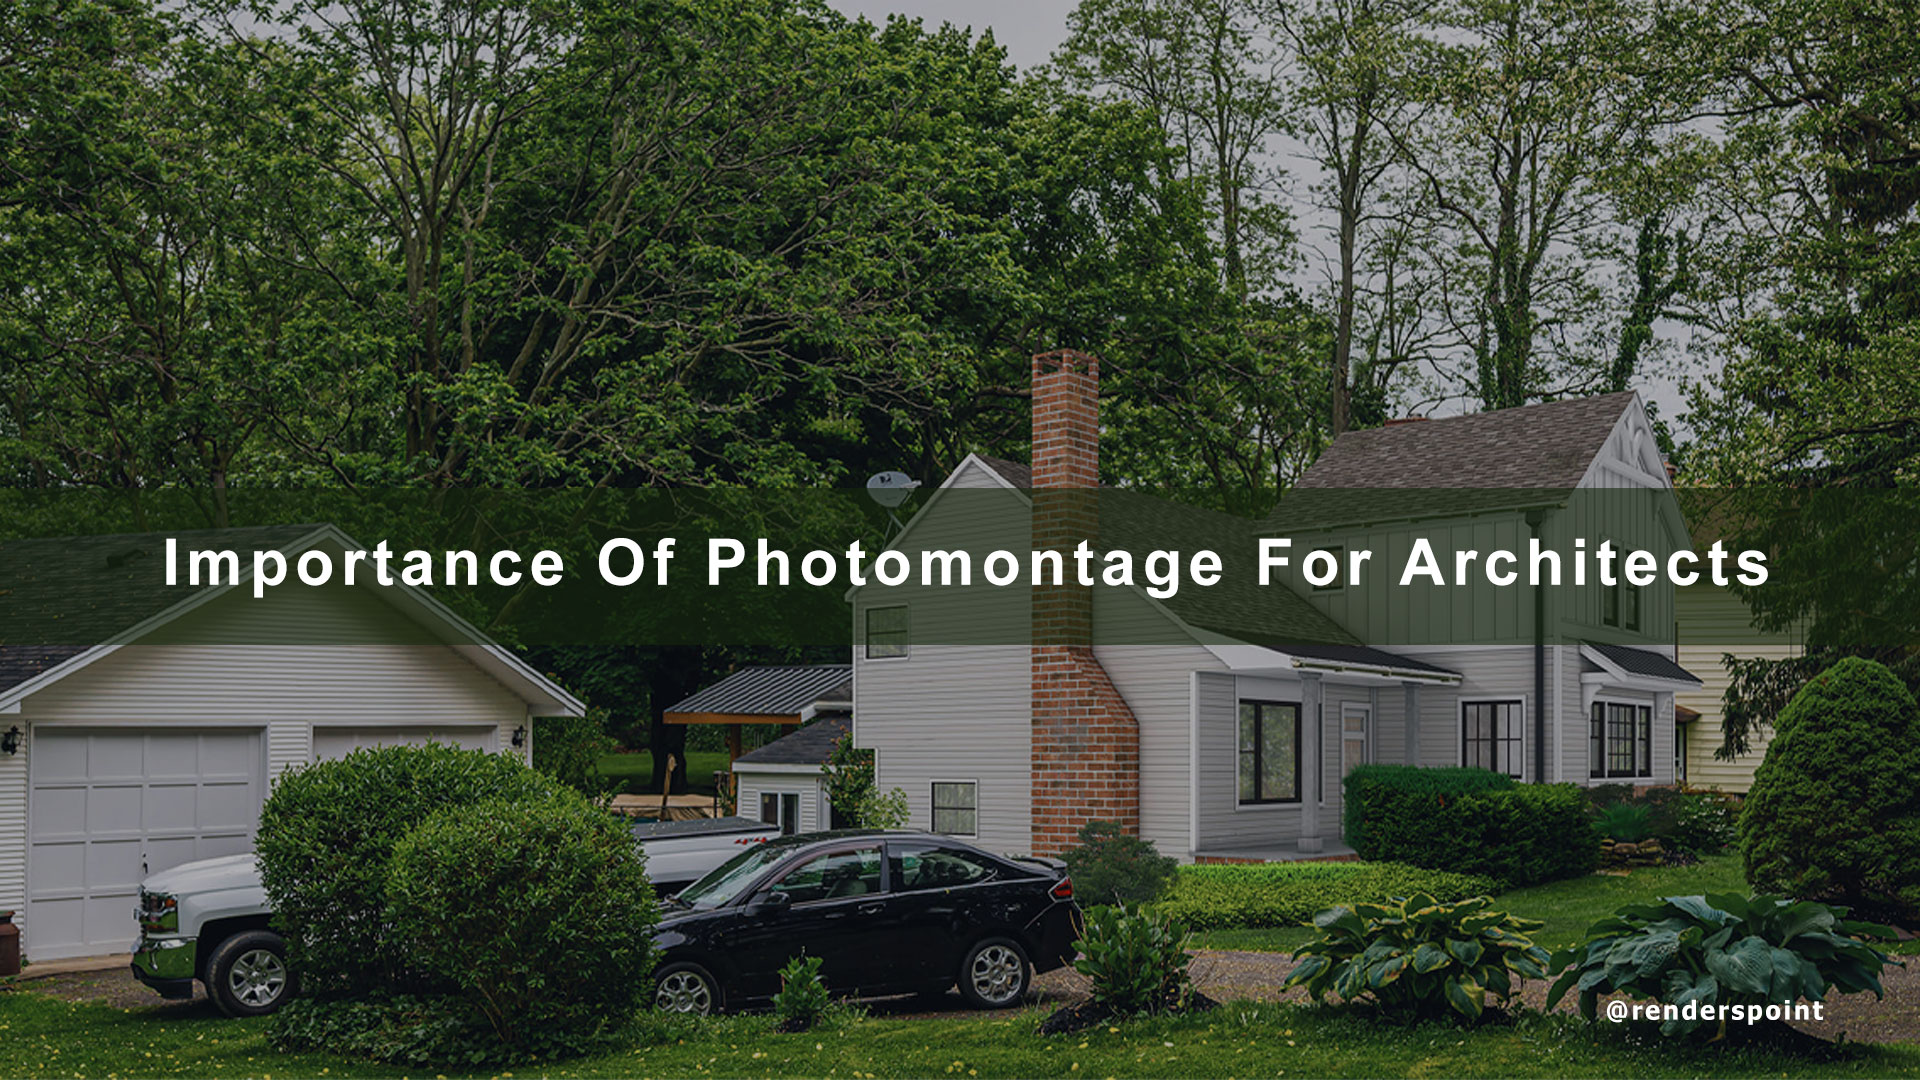 Importance of photomontage for Architects